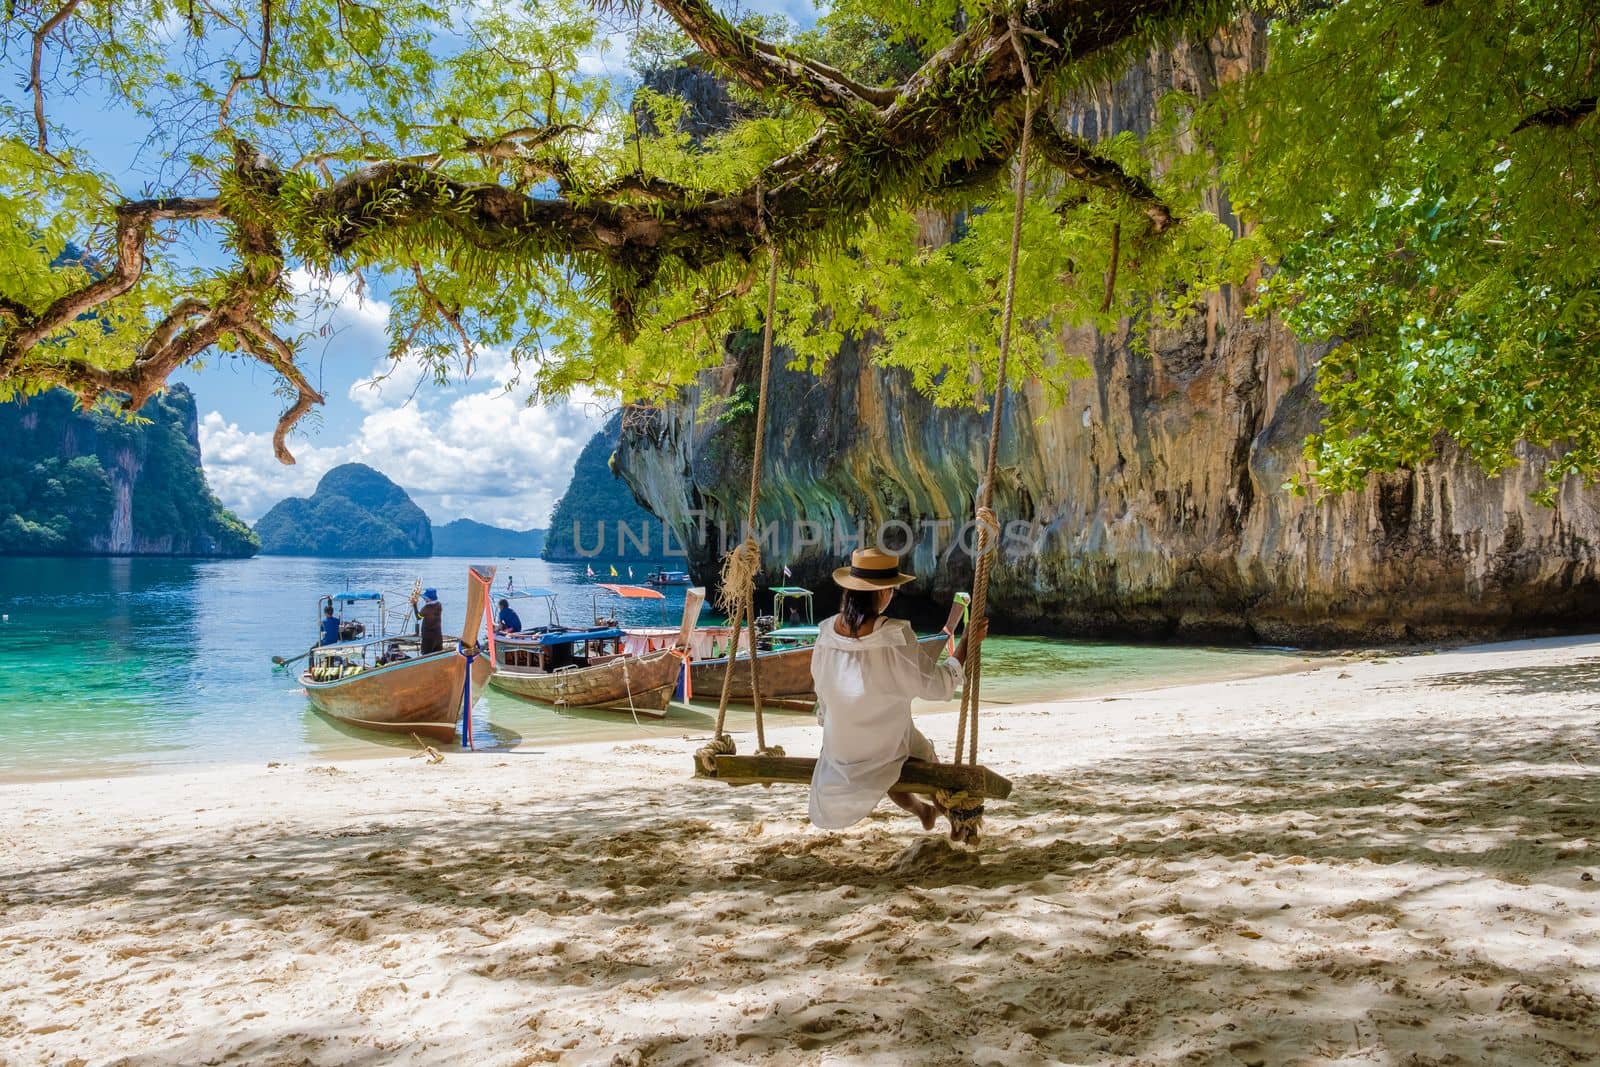 women on a swing at the Tropical lagoon of Koh Loa Lading Krabi Thailand part of the Koh Hong Islands in Thailand. beautiful beach with limestone cliffs and longtail boats